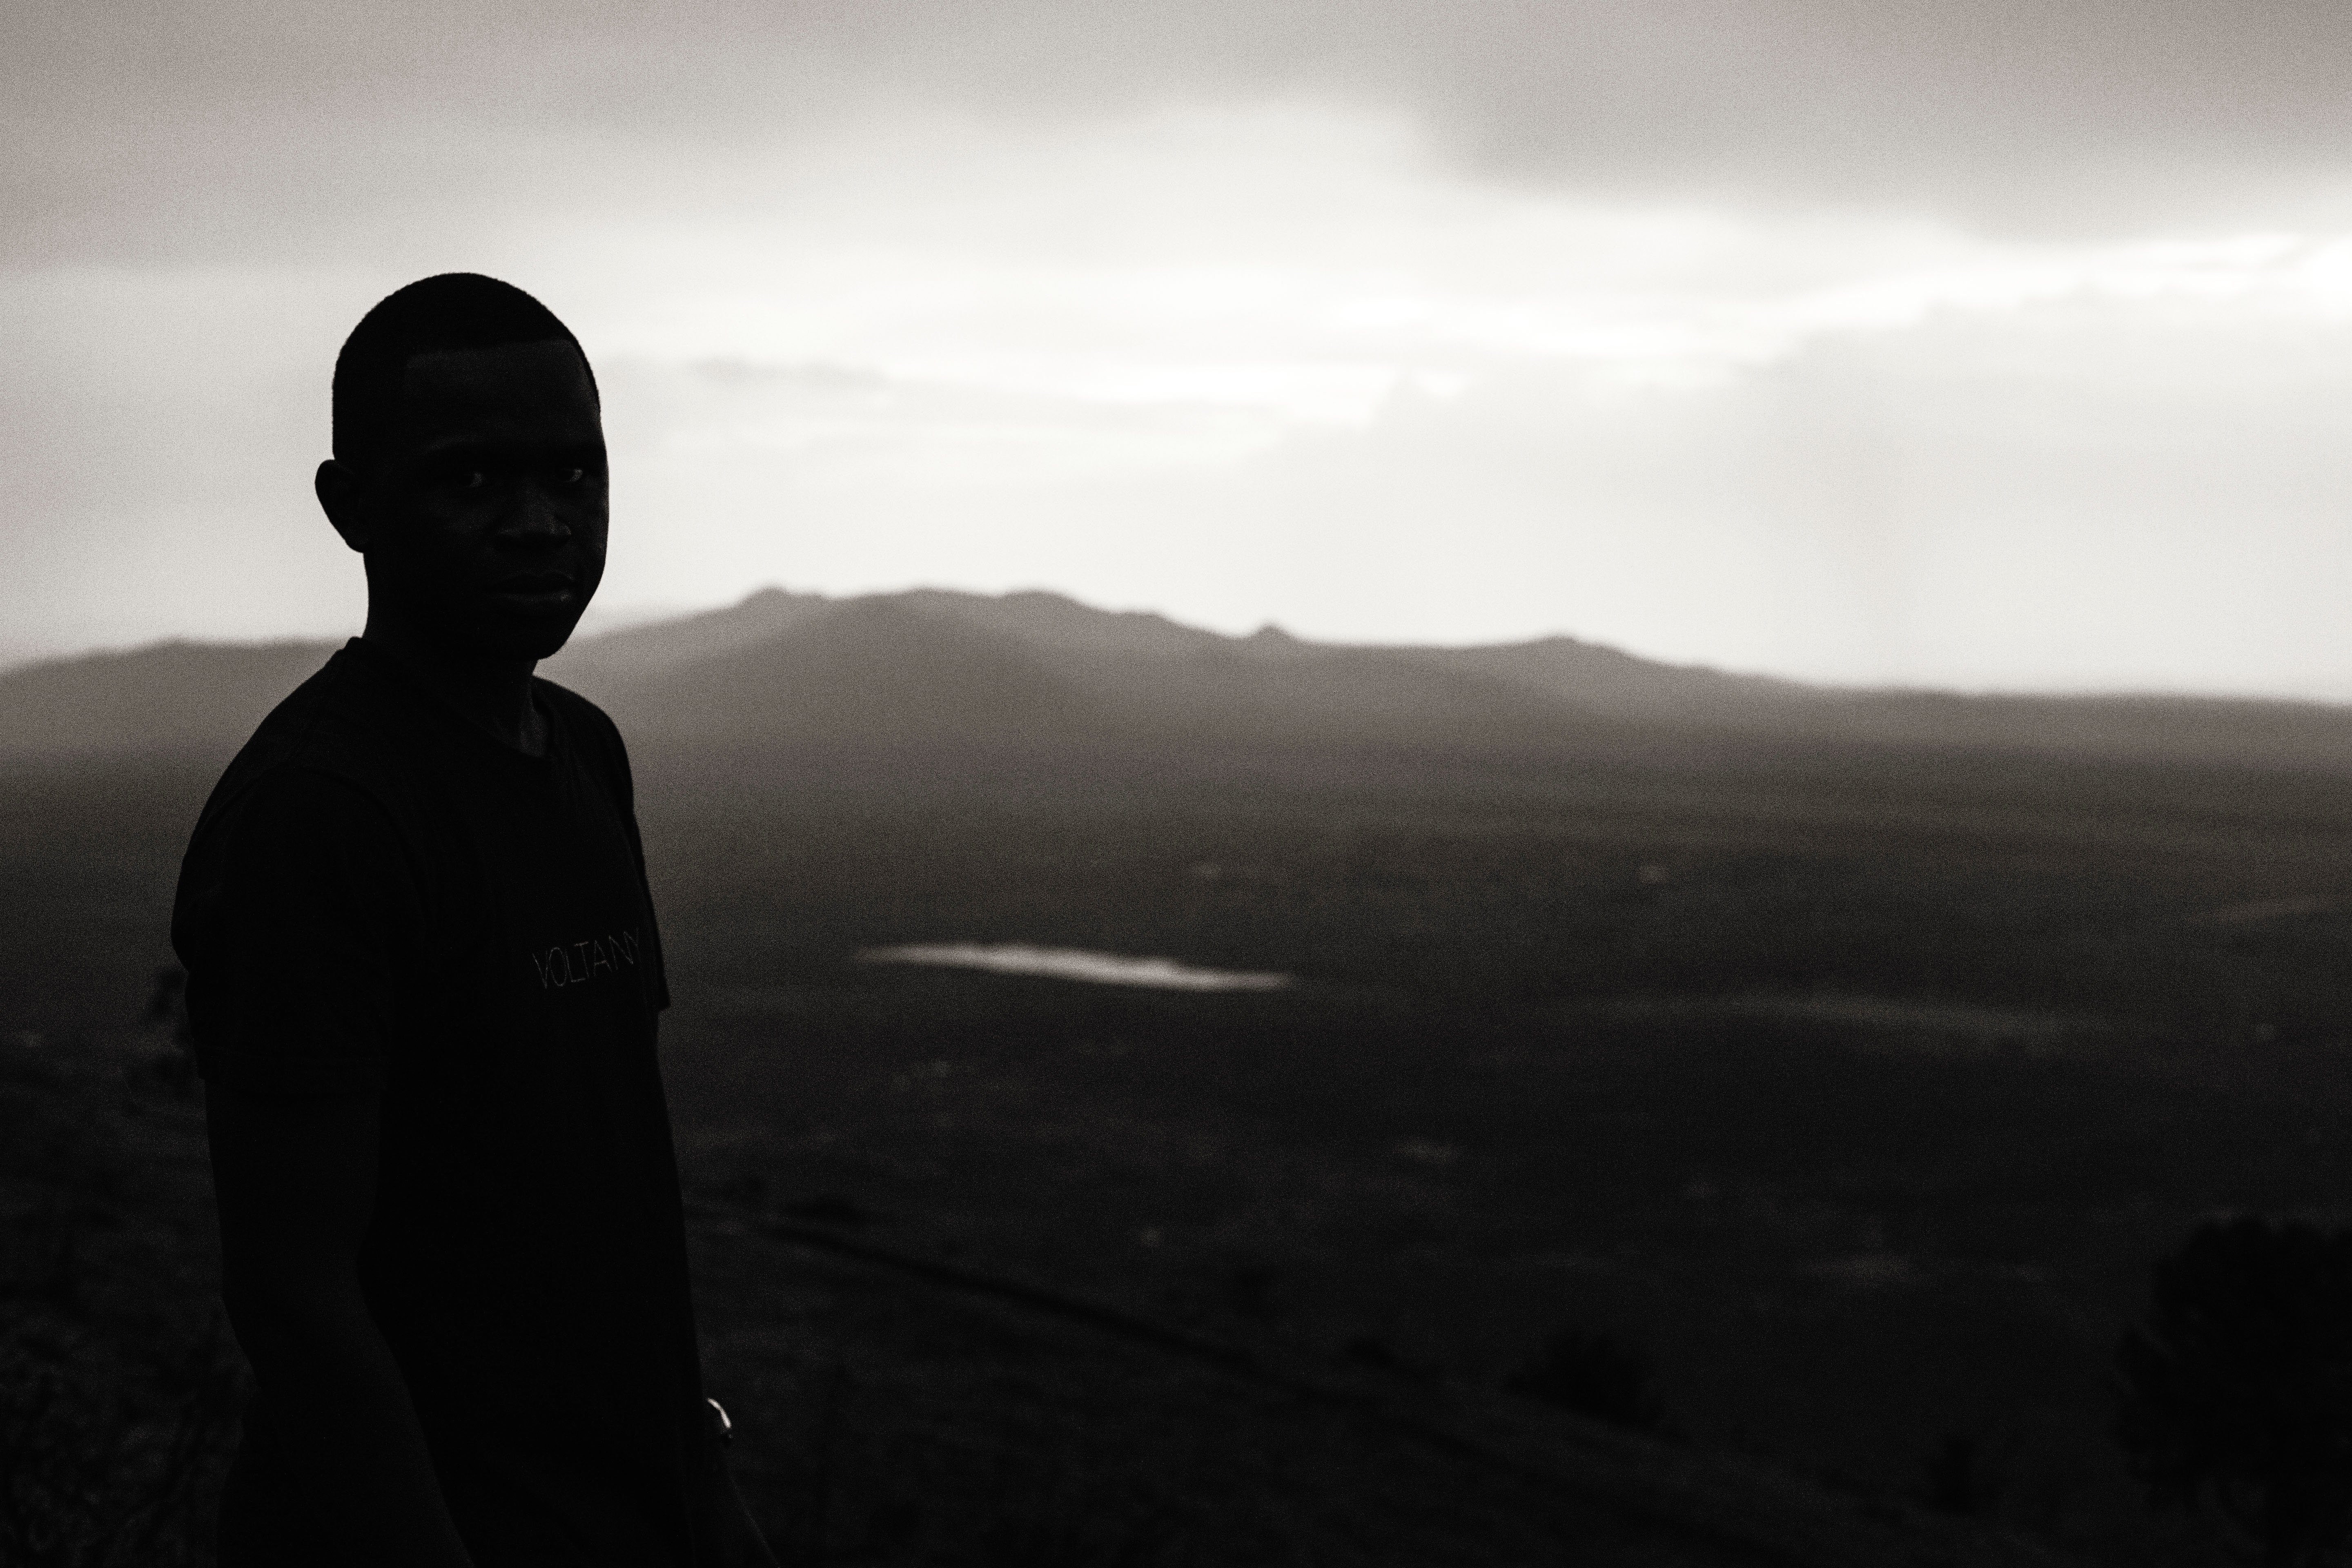 A young person staring out over the Kenyan countryside.